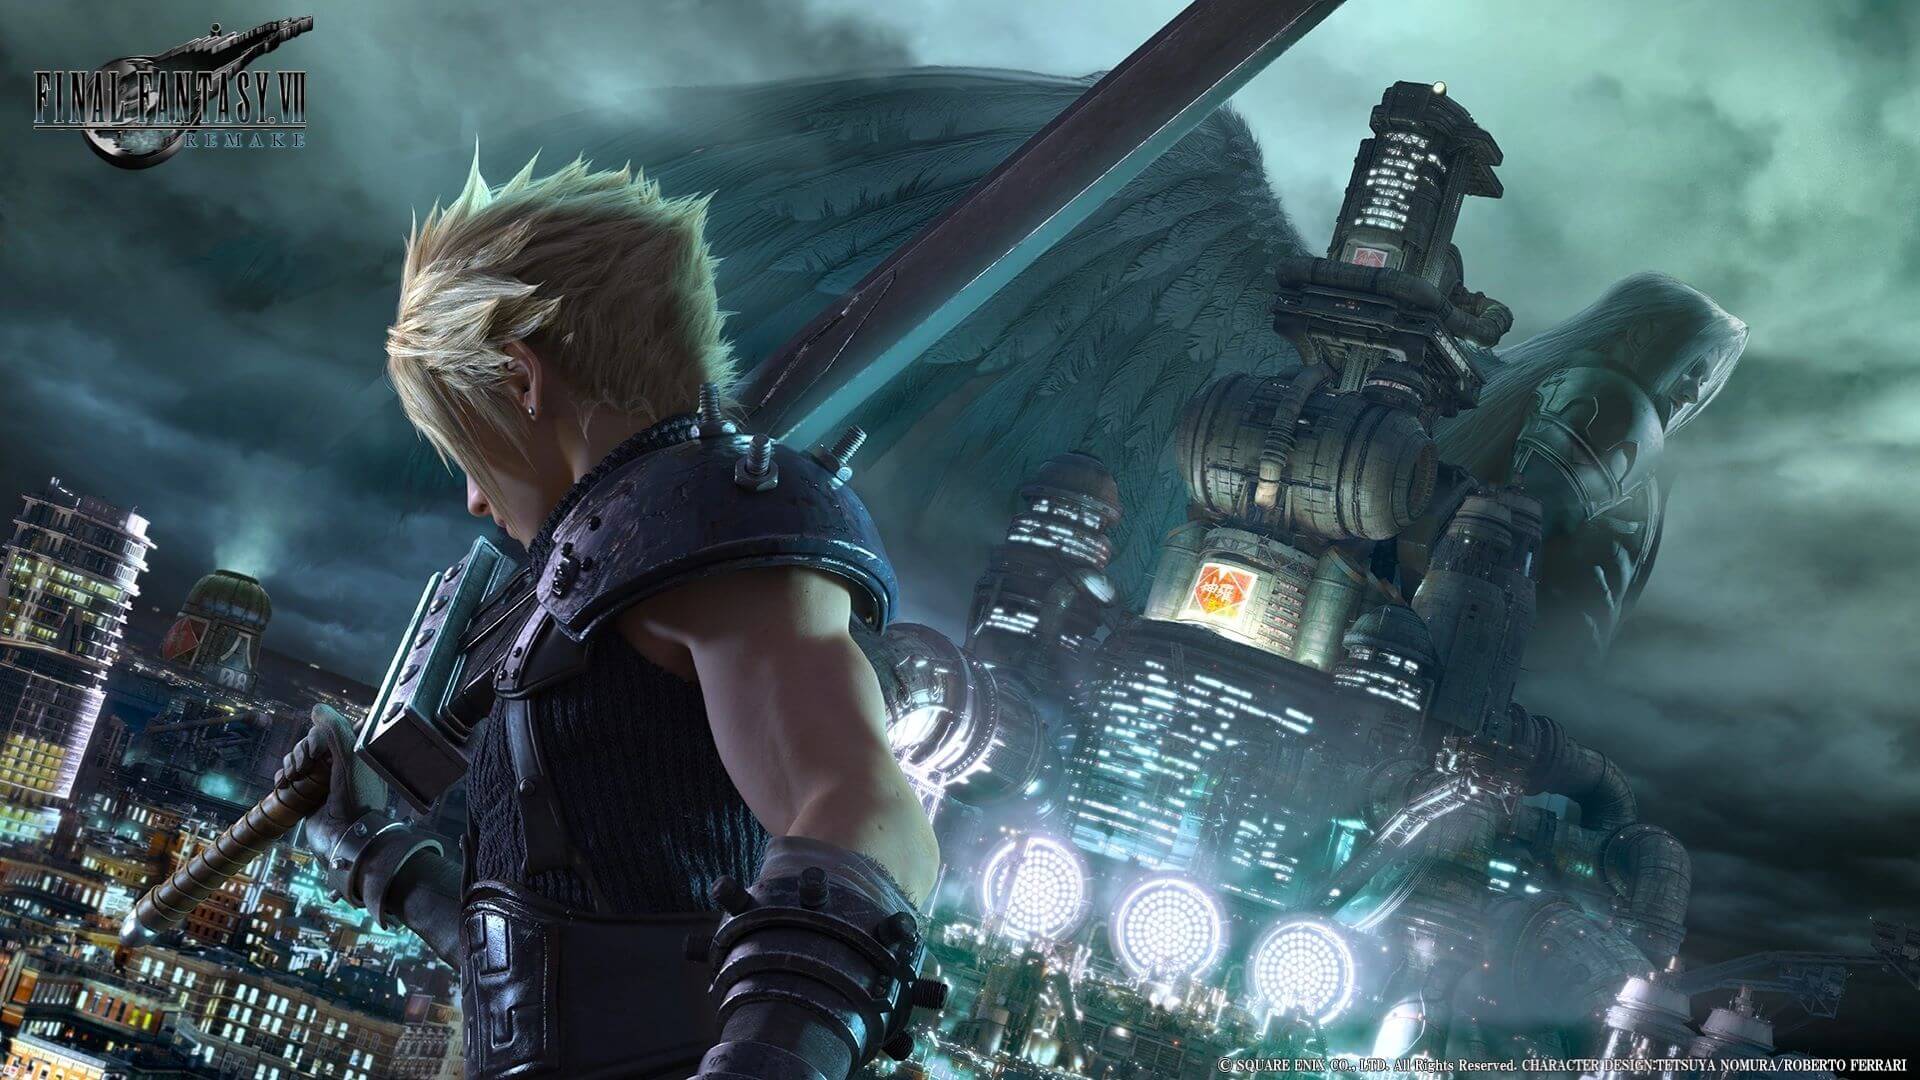 Coronavirus Releases The Final Fantasy 7 Remake Early for Gamers